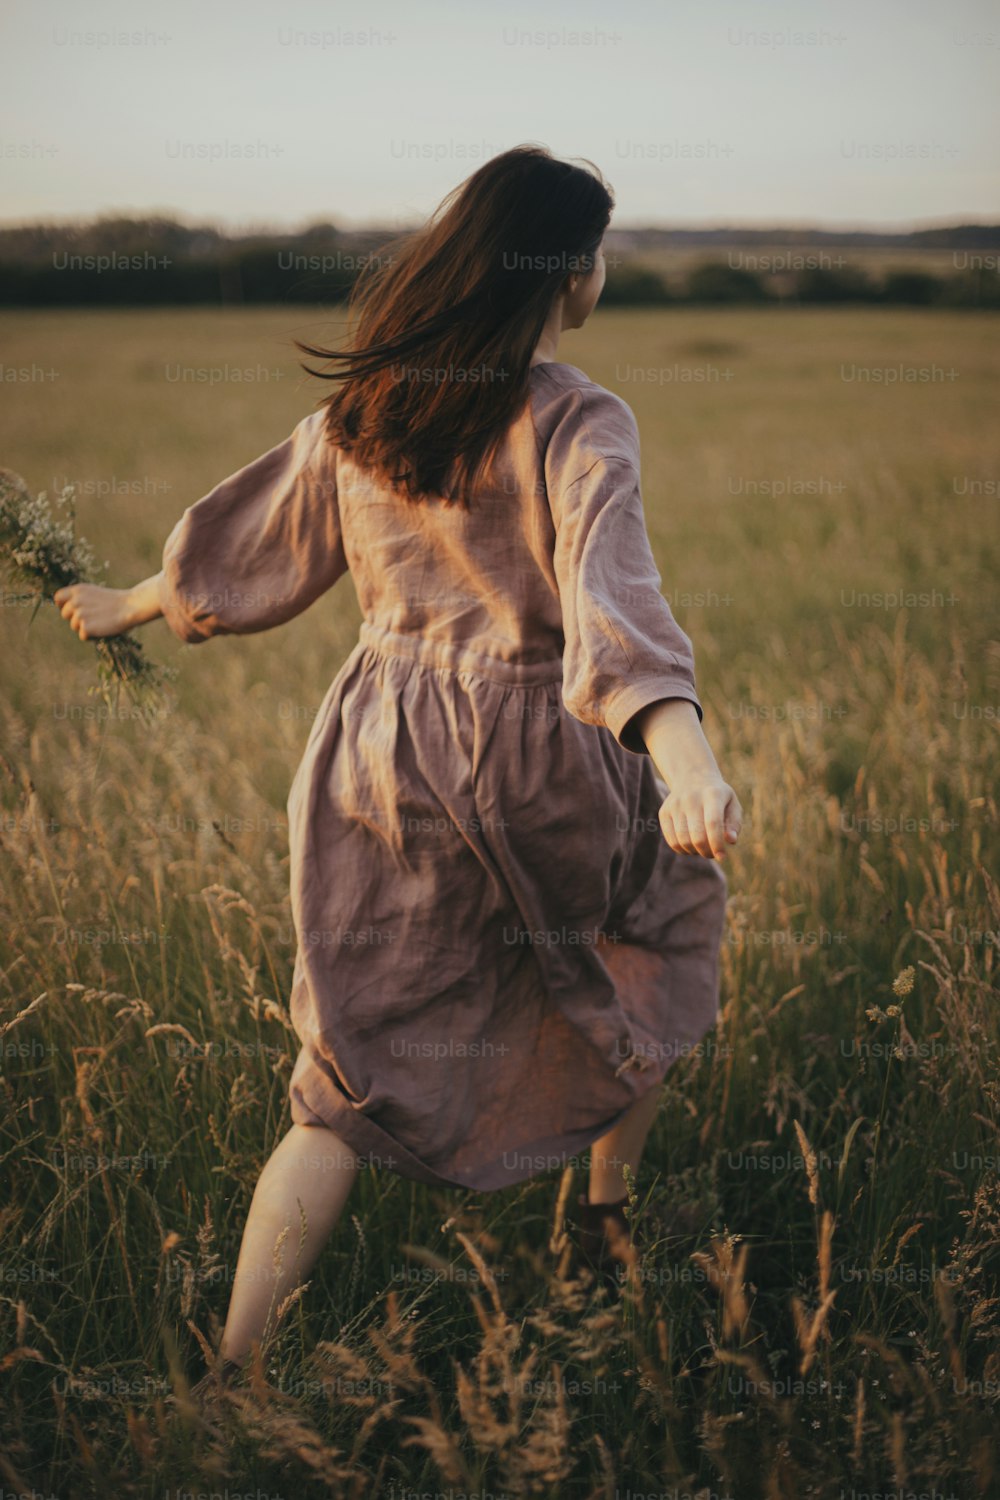 Beautiful woman in linen dress running with wildflowers in hand in summer meadow in sunset. Atmospheric carefree moment. Stylish young female in rustic dress enjoying free evening in countryside